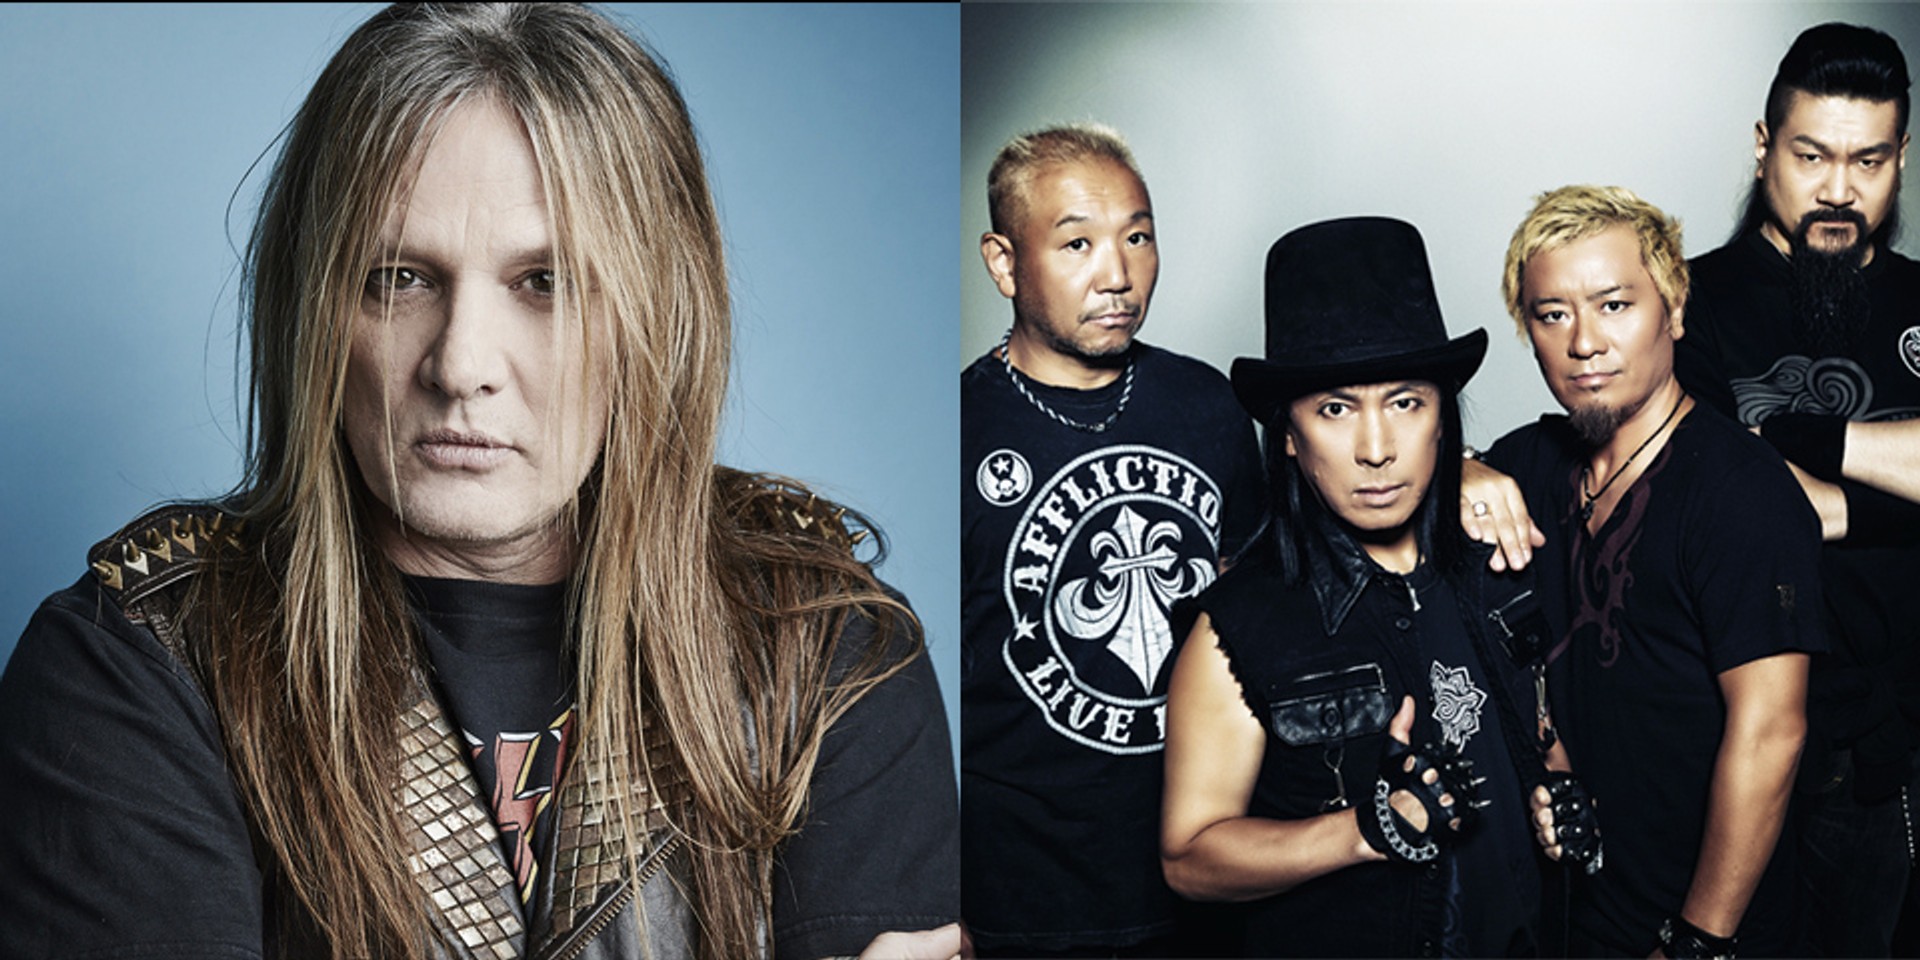 Loudness to join Sebastian Bach in Singapore show